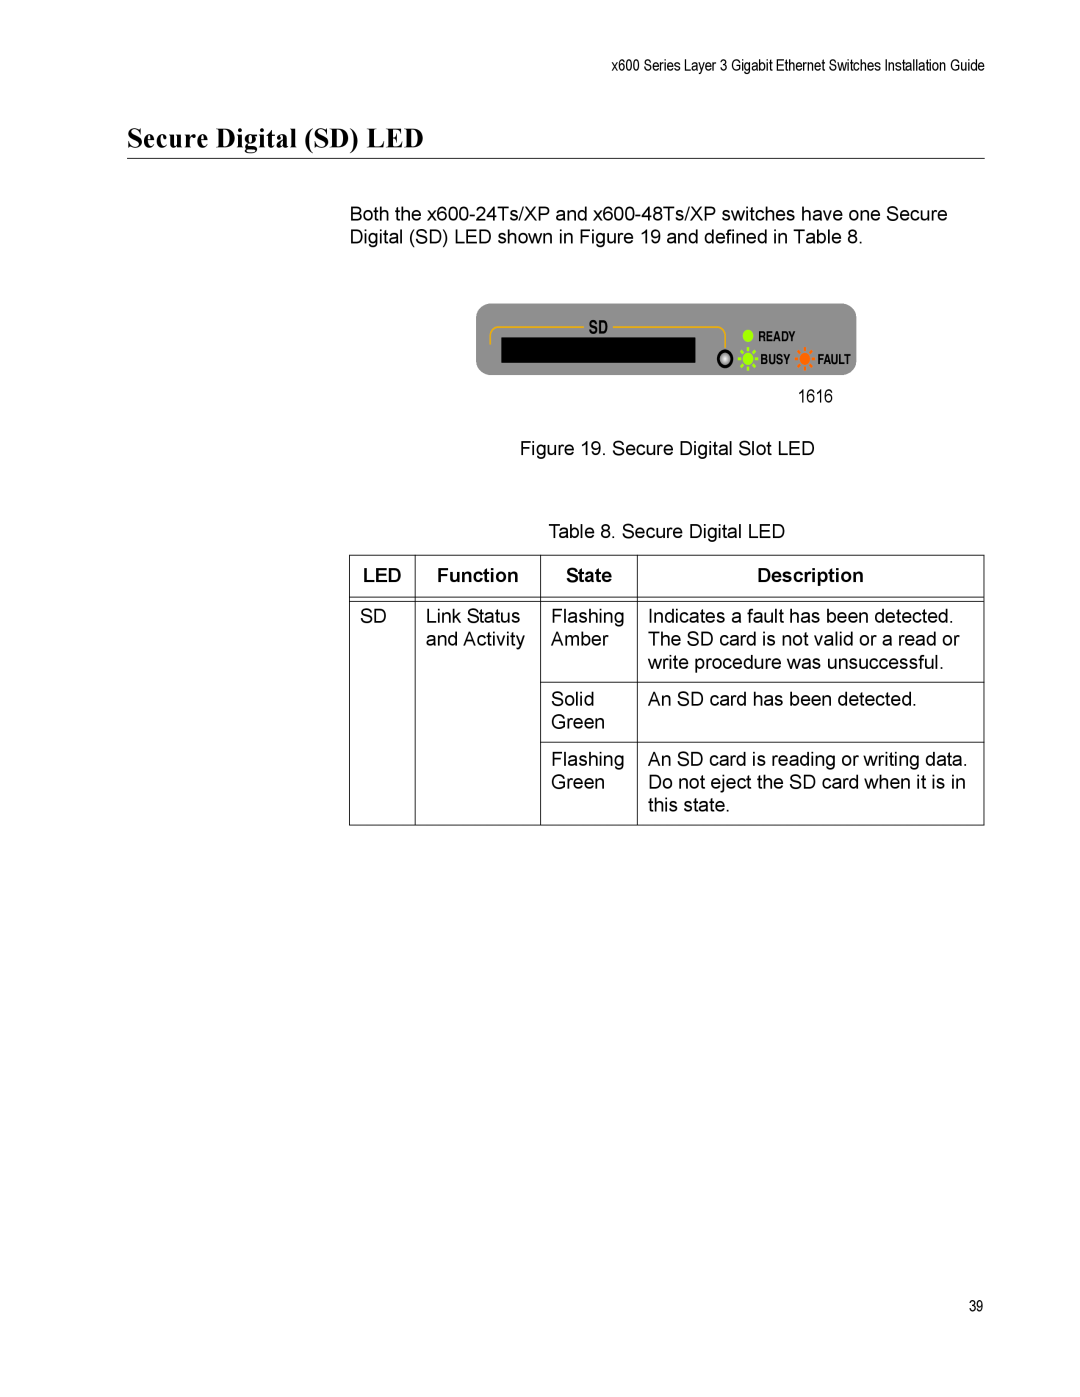 Allied Telesis x600-24Ts-POE manual Secure Digital SD LED, Function, State, Description 